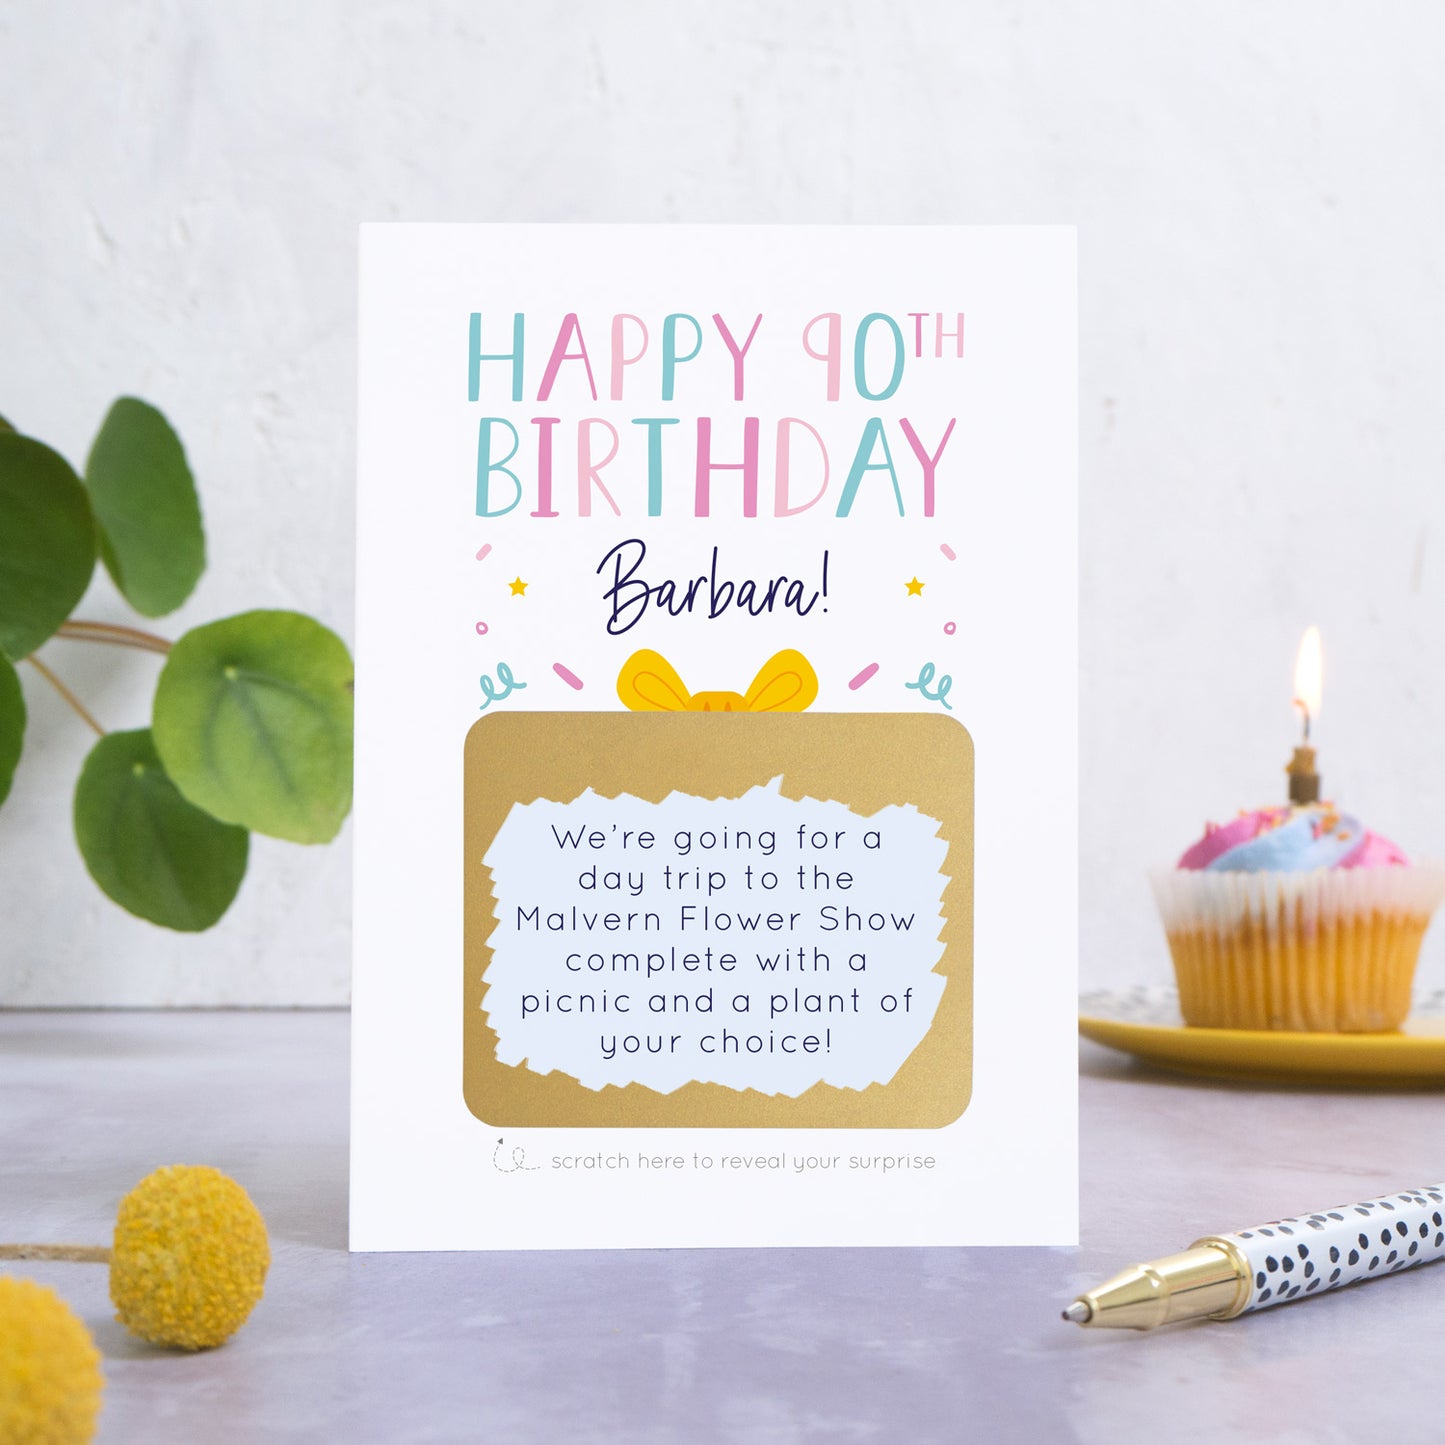 A personalised happy 90th birthday scratch card in pink that has been photographed on a white and grey background. There is foliage and yellow flowers on the left and a cupcake and a pen to the right. The card features the recipients name and a scratch panel that has been scratched off revealing a personalised message.